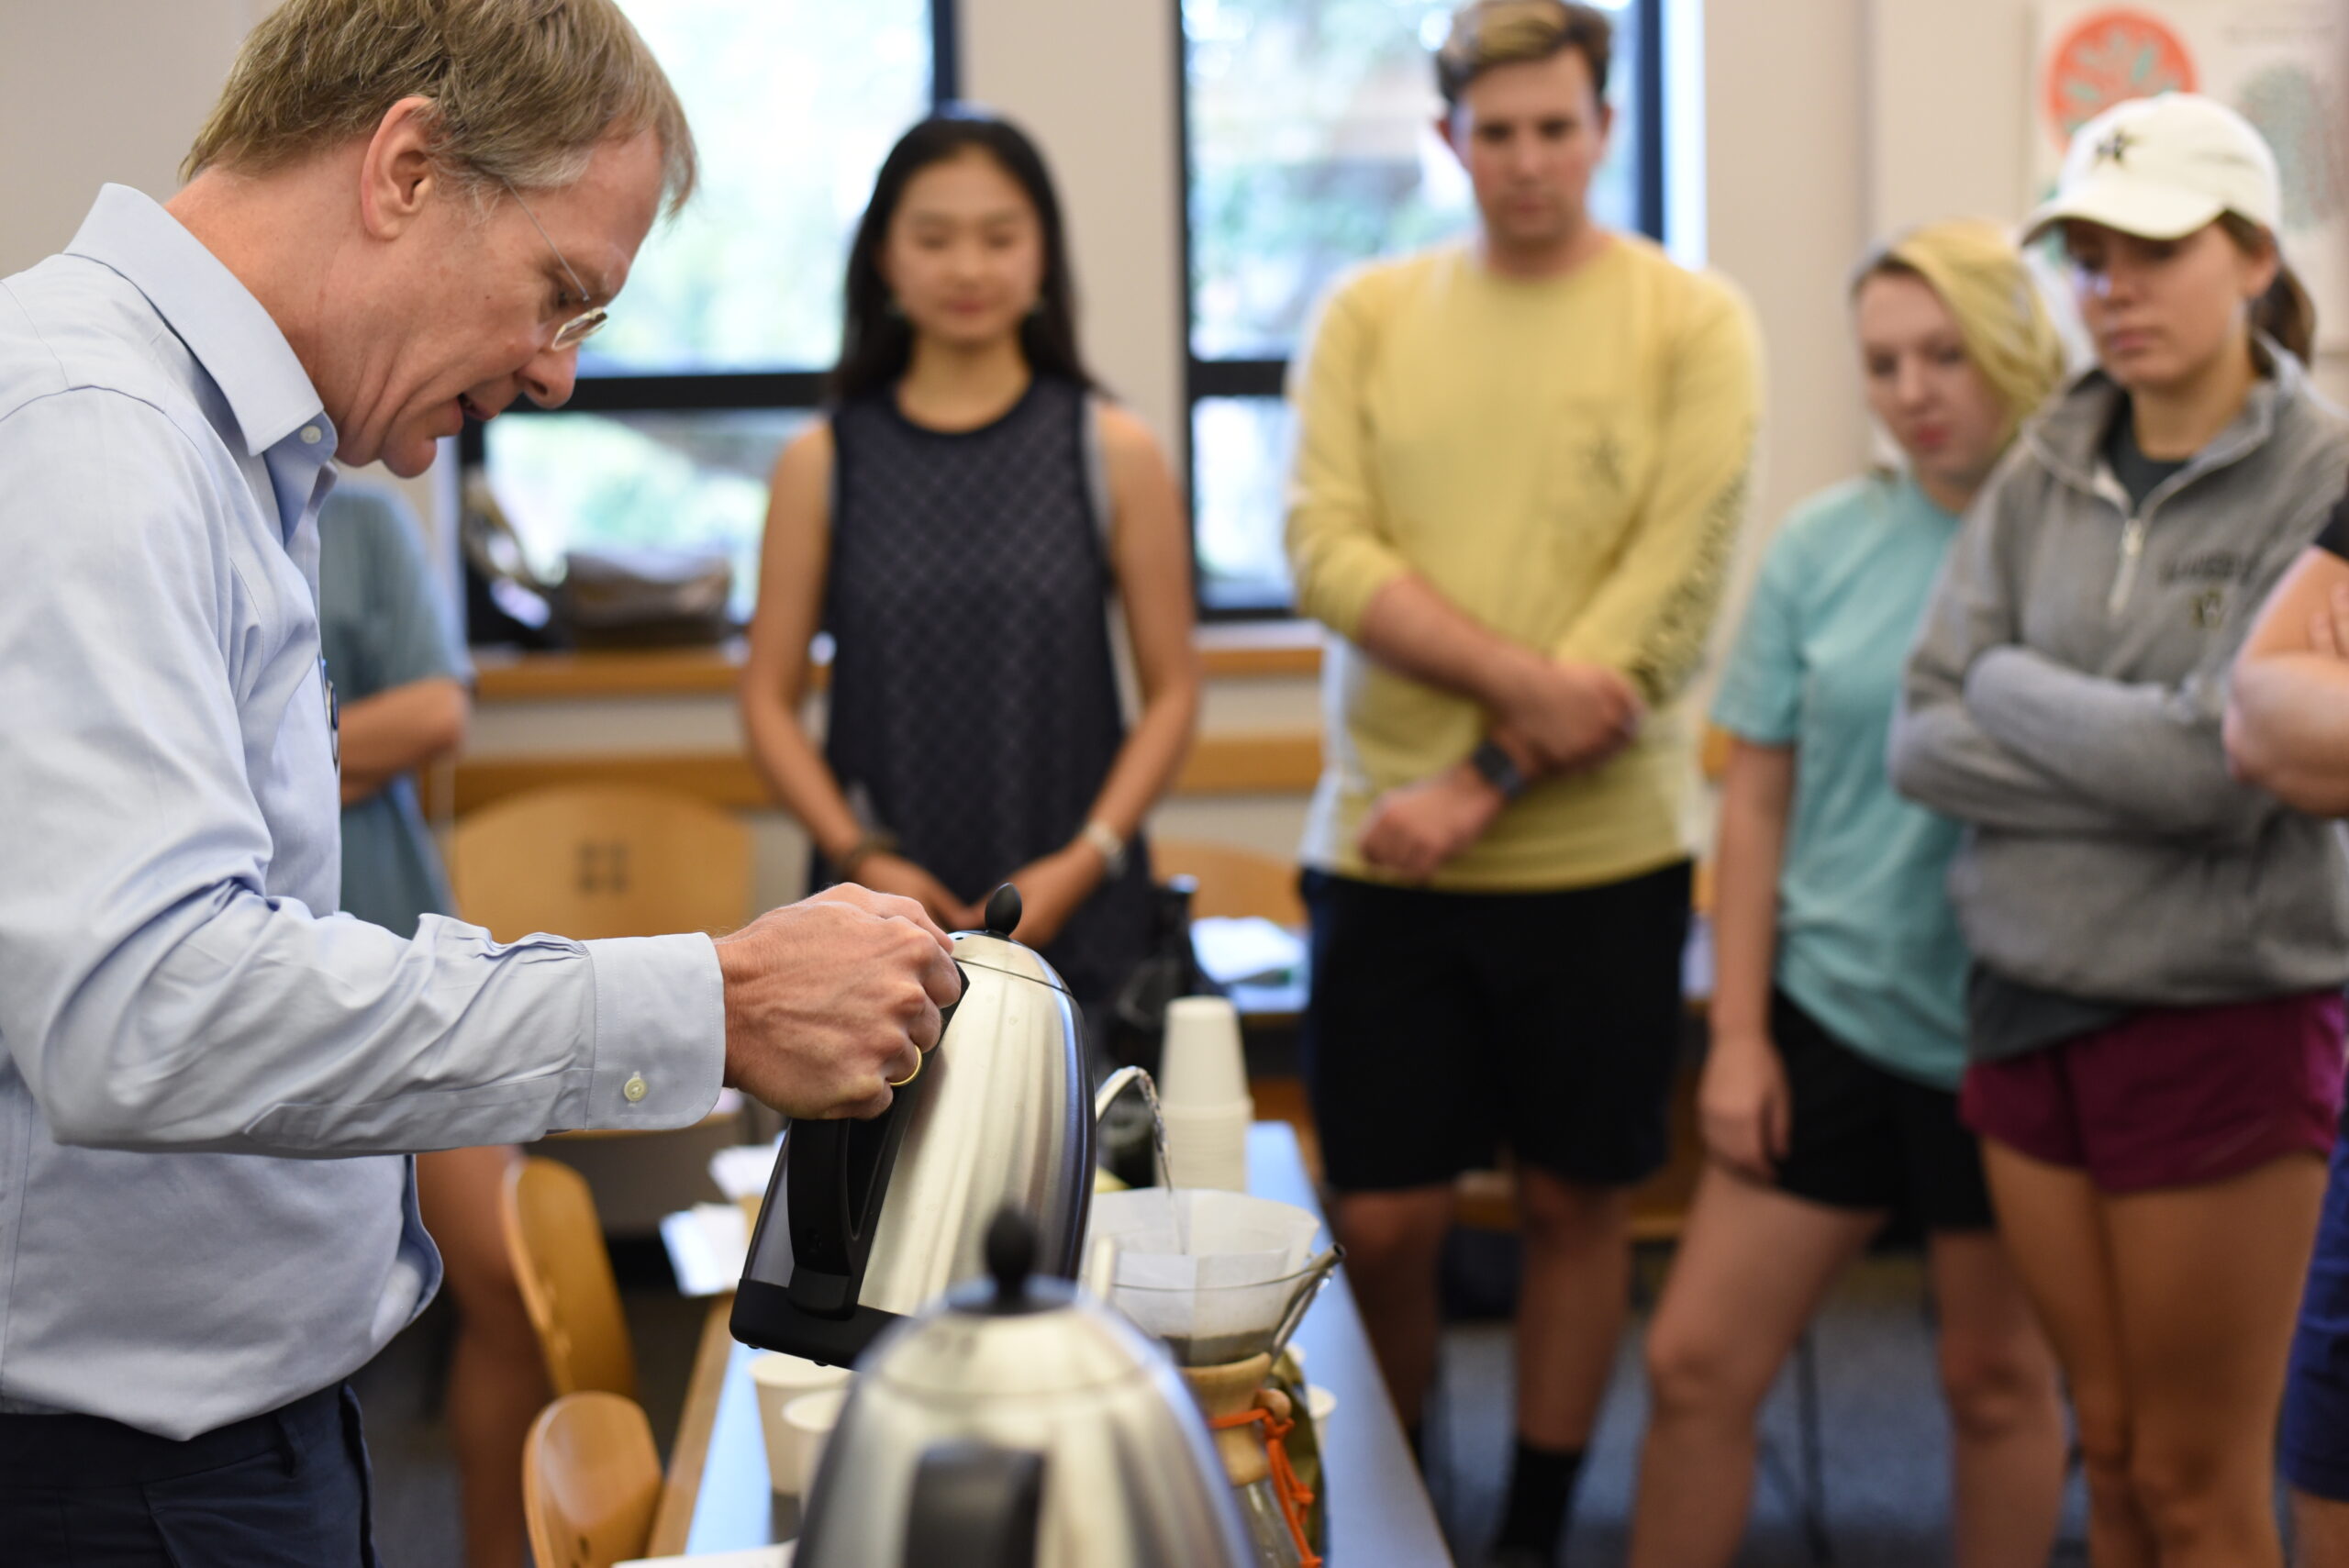 Students help build a more equitable coffee supply chain through innovative design challenge